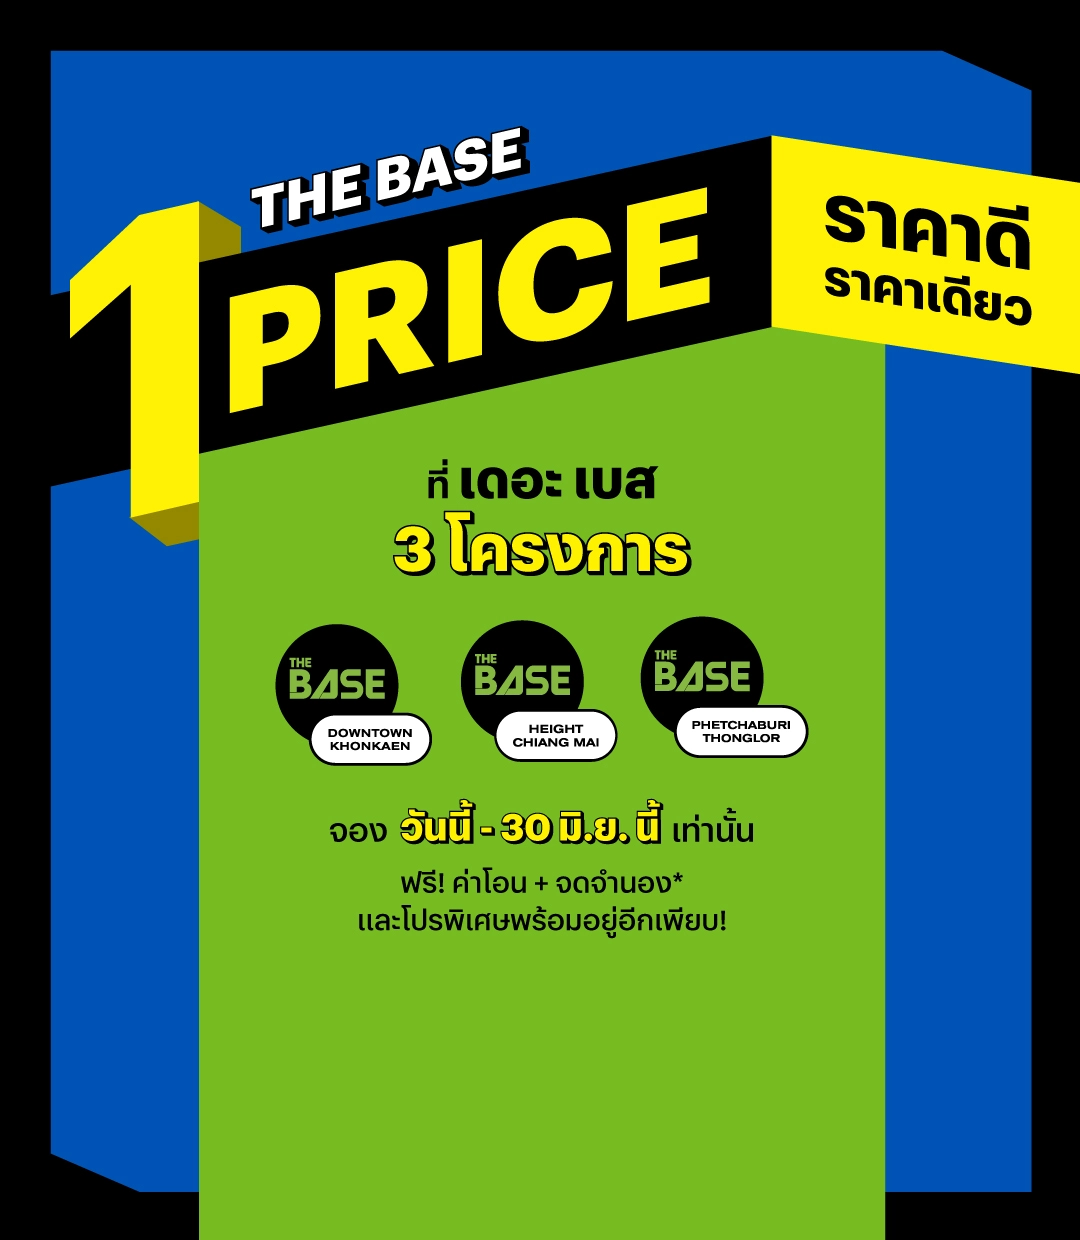 THE BASE One Price